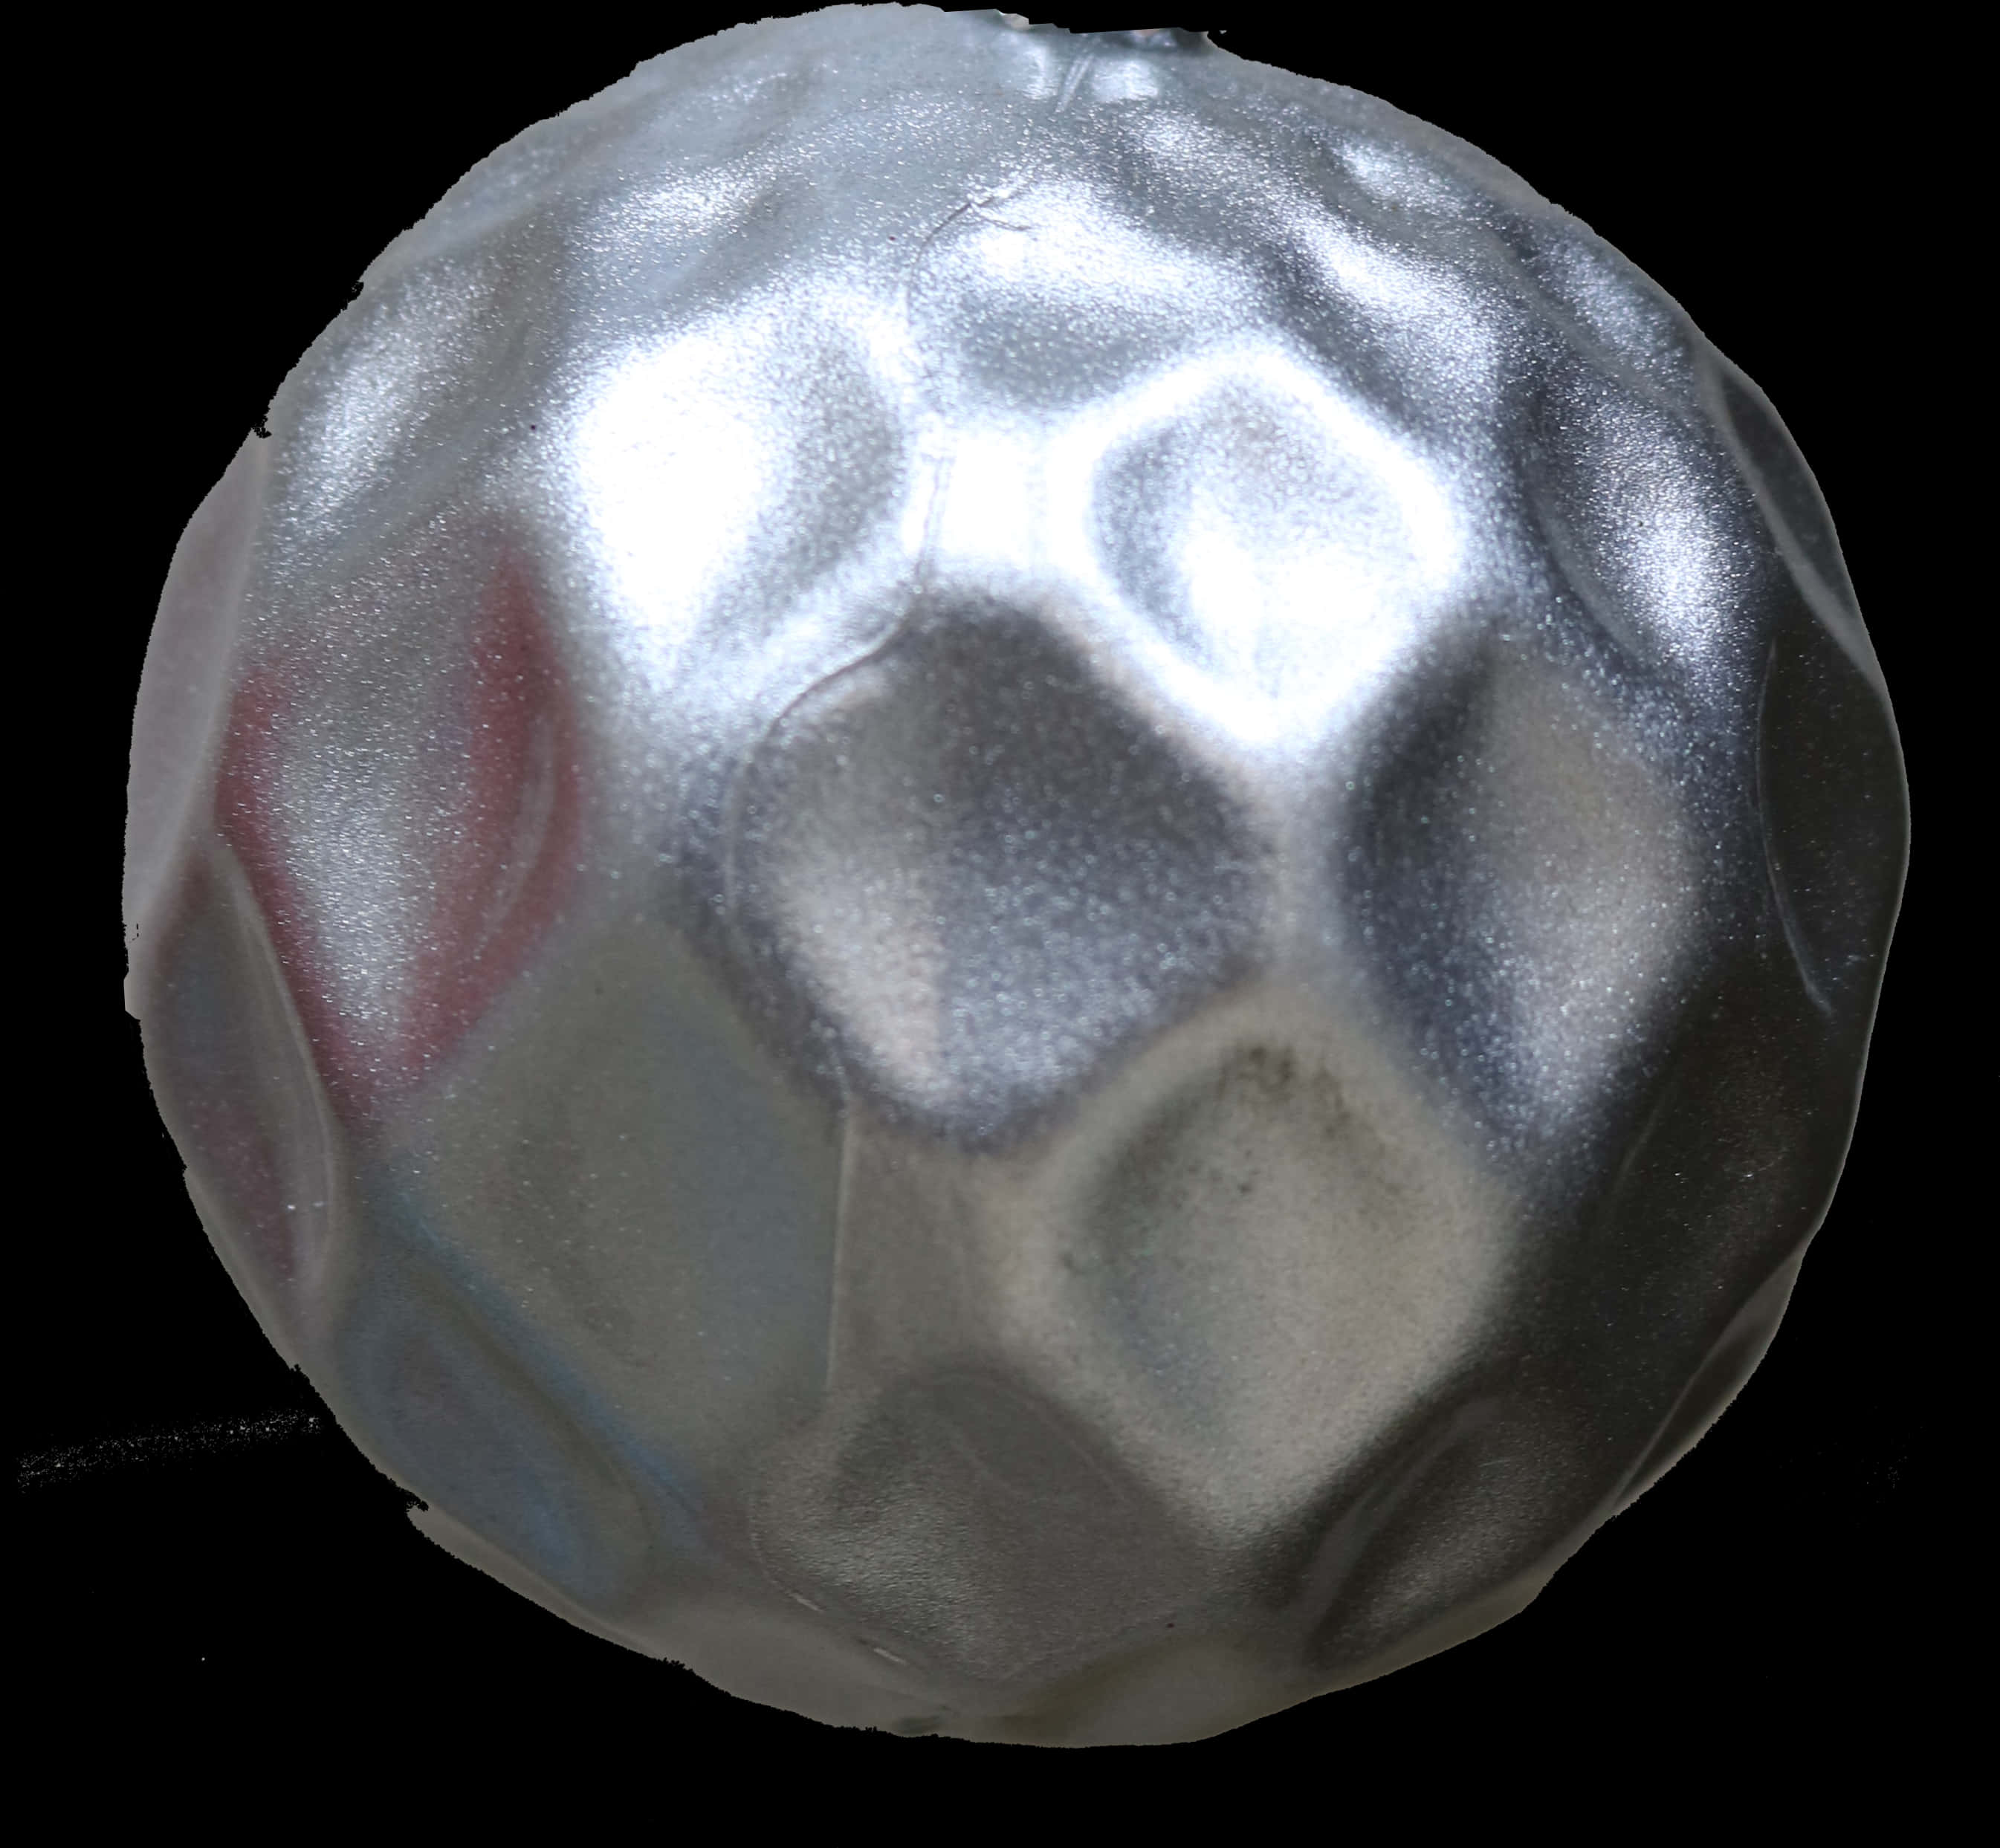 Silver Christmas Ornament PNG image